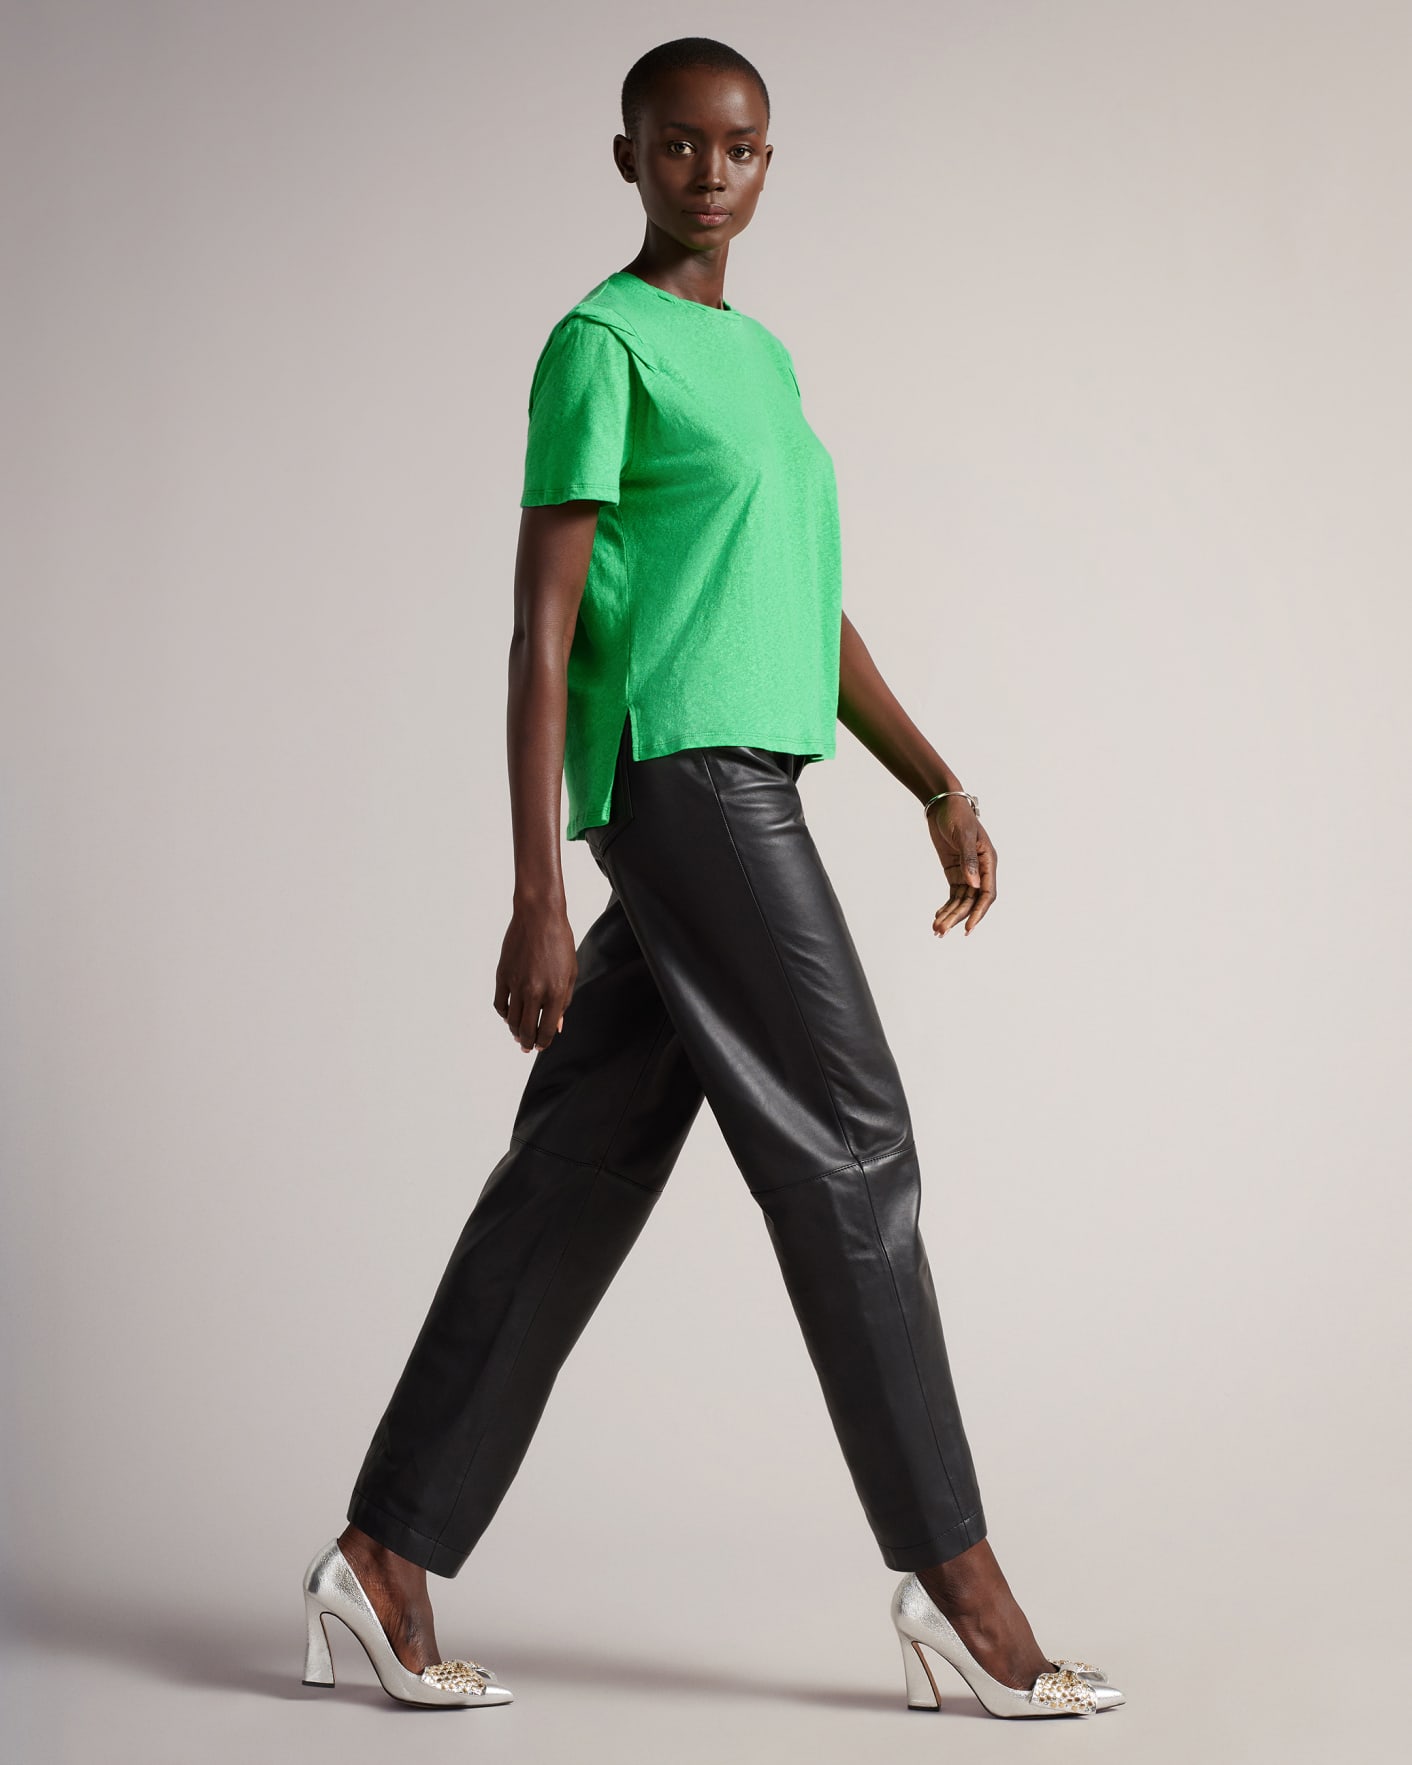 Green T-Shirt With Twisted Neck And Shoulder Detail Ted Baker